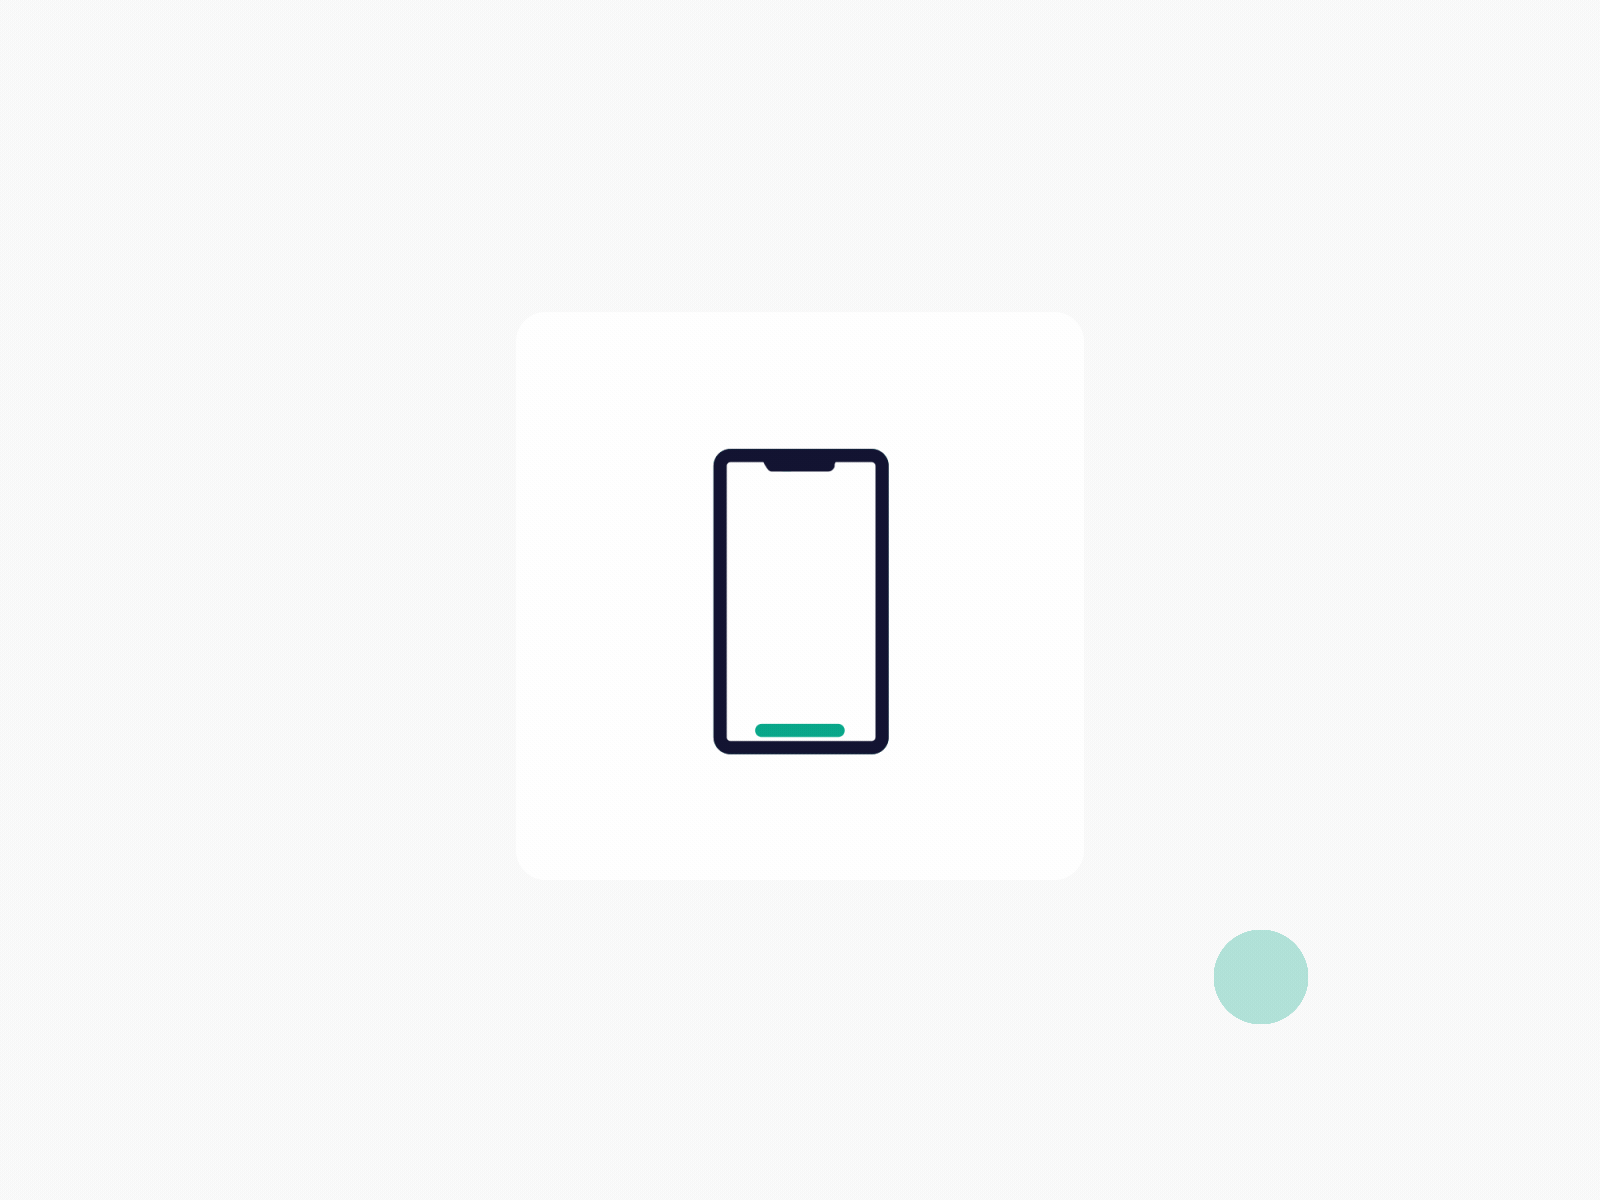 Rotate Your Phone Animated Icon by Tom Wilusz on Dribbble